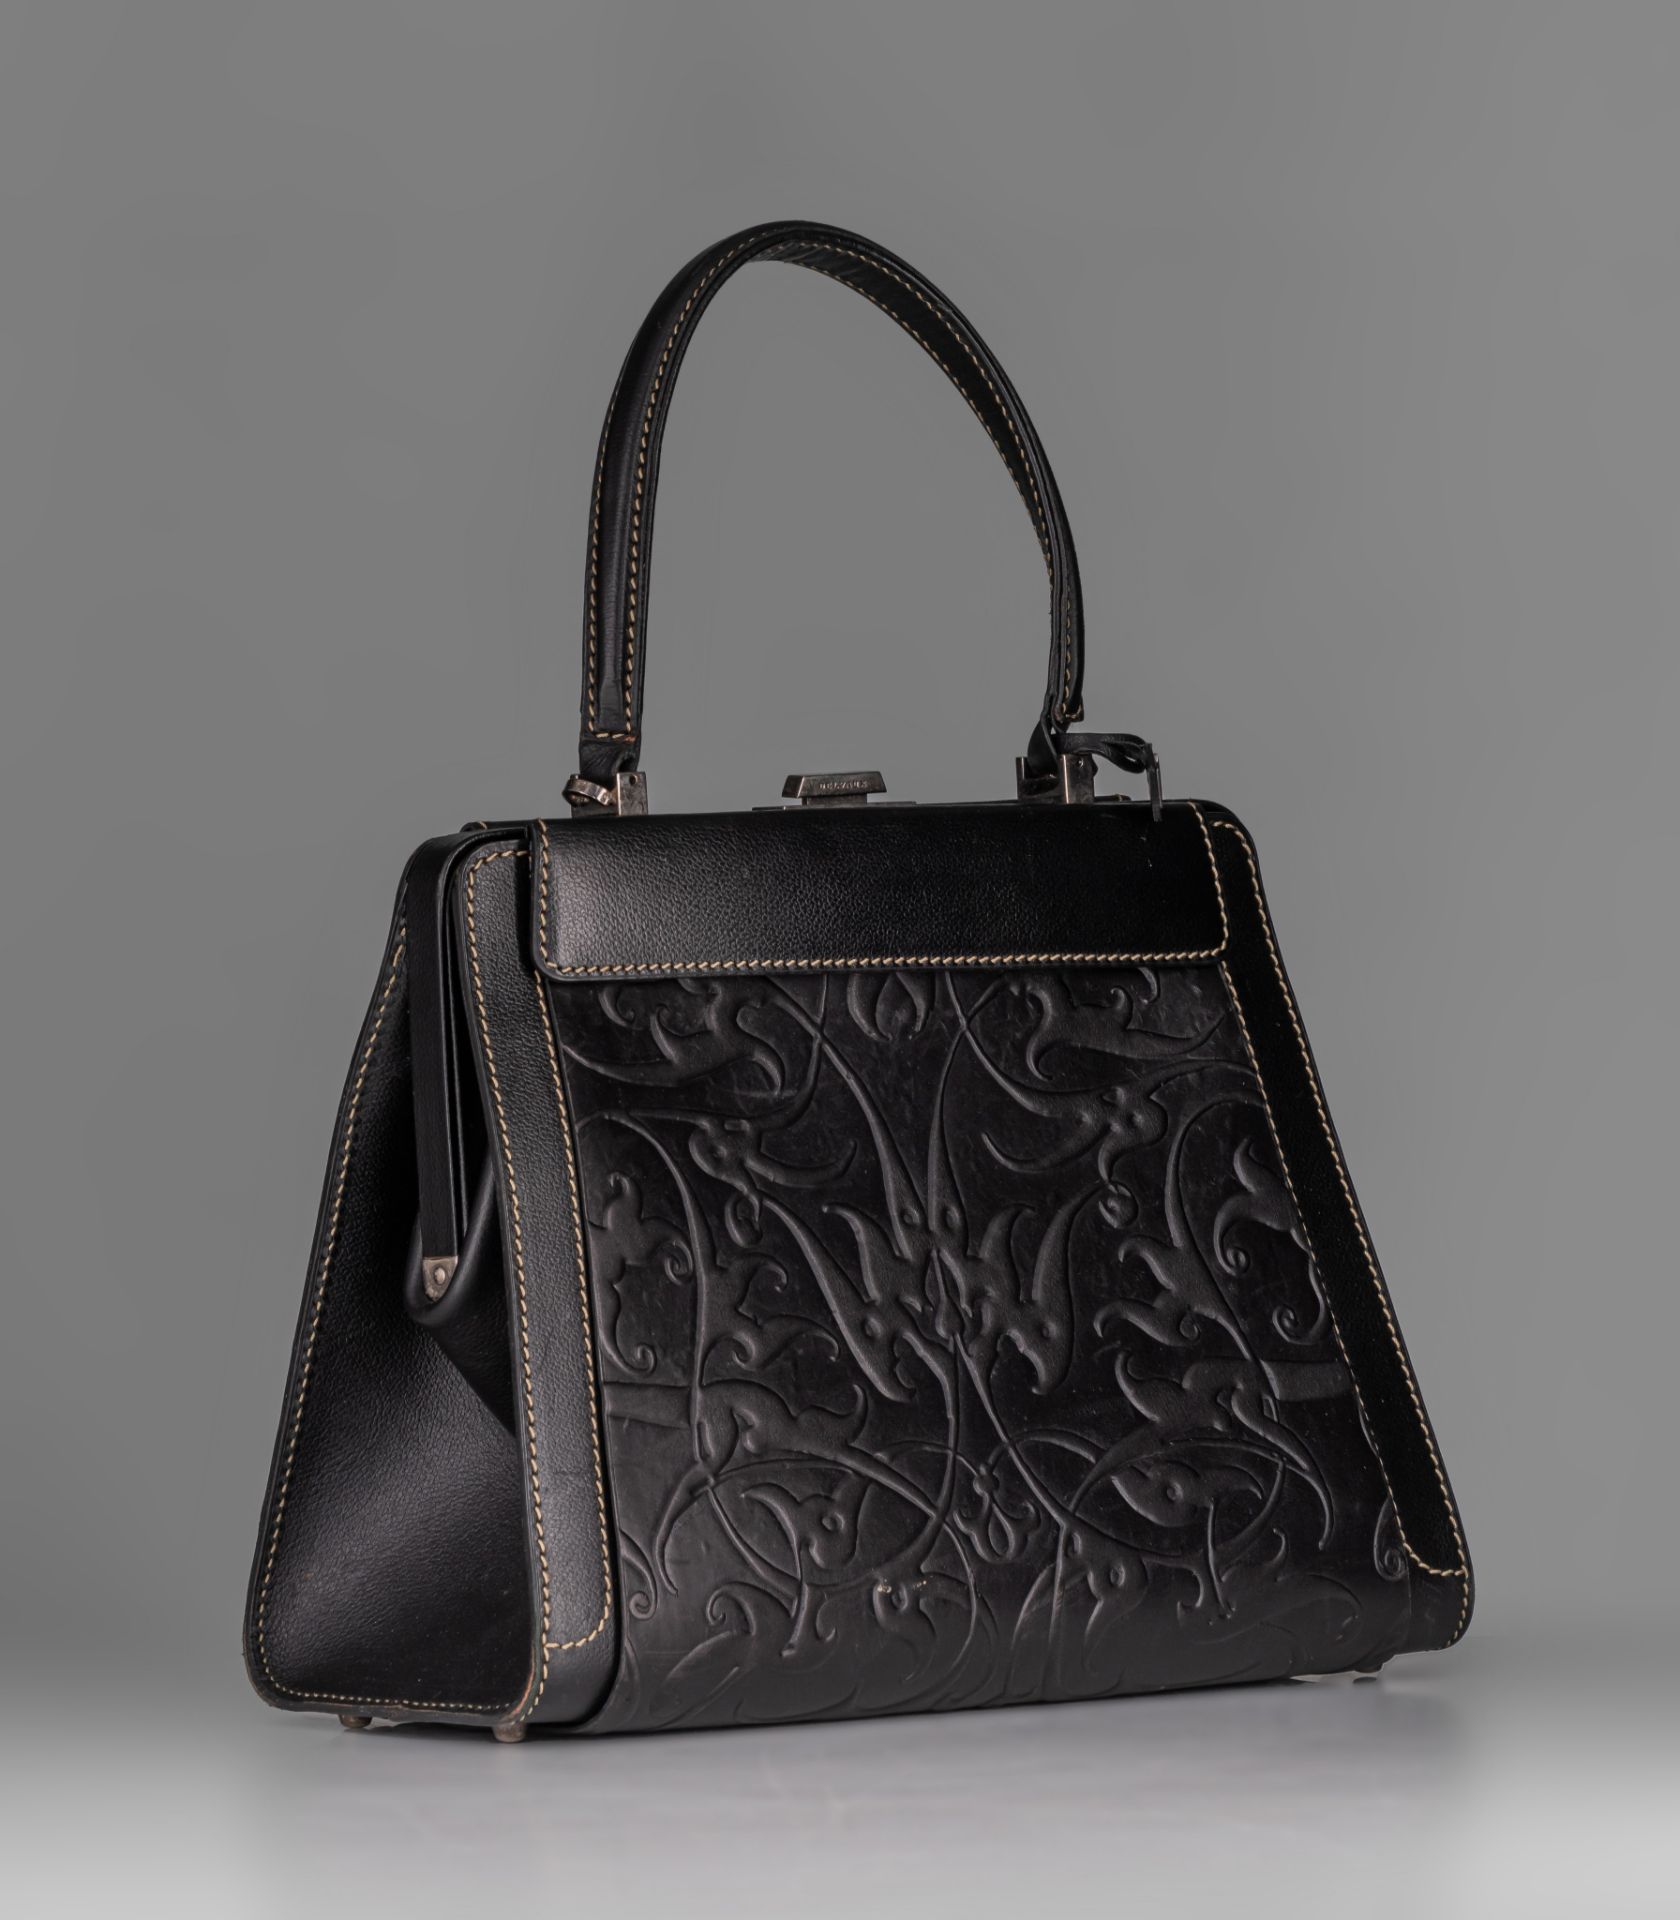 A Delvaux 'Jumping Illusion' handbag in black leather, with adjustable covers - Image 3 of 15